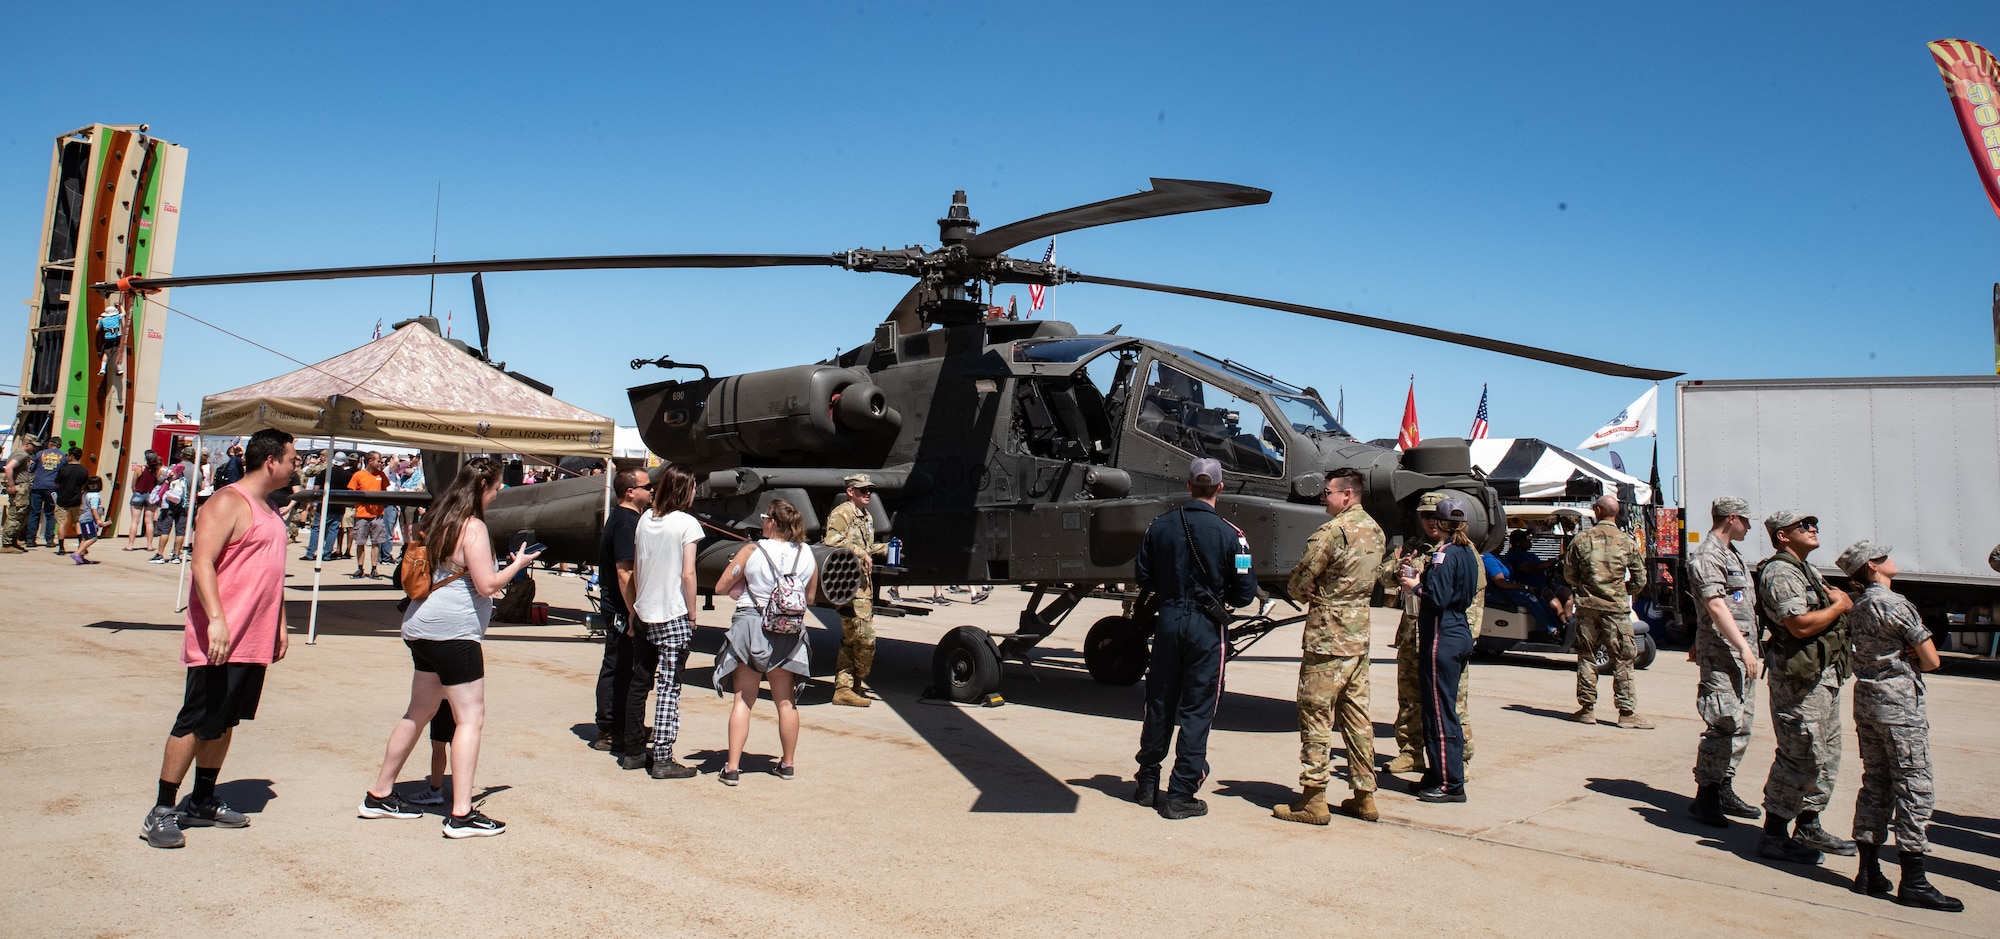 People standing around a military helicopter.